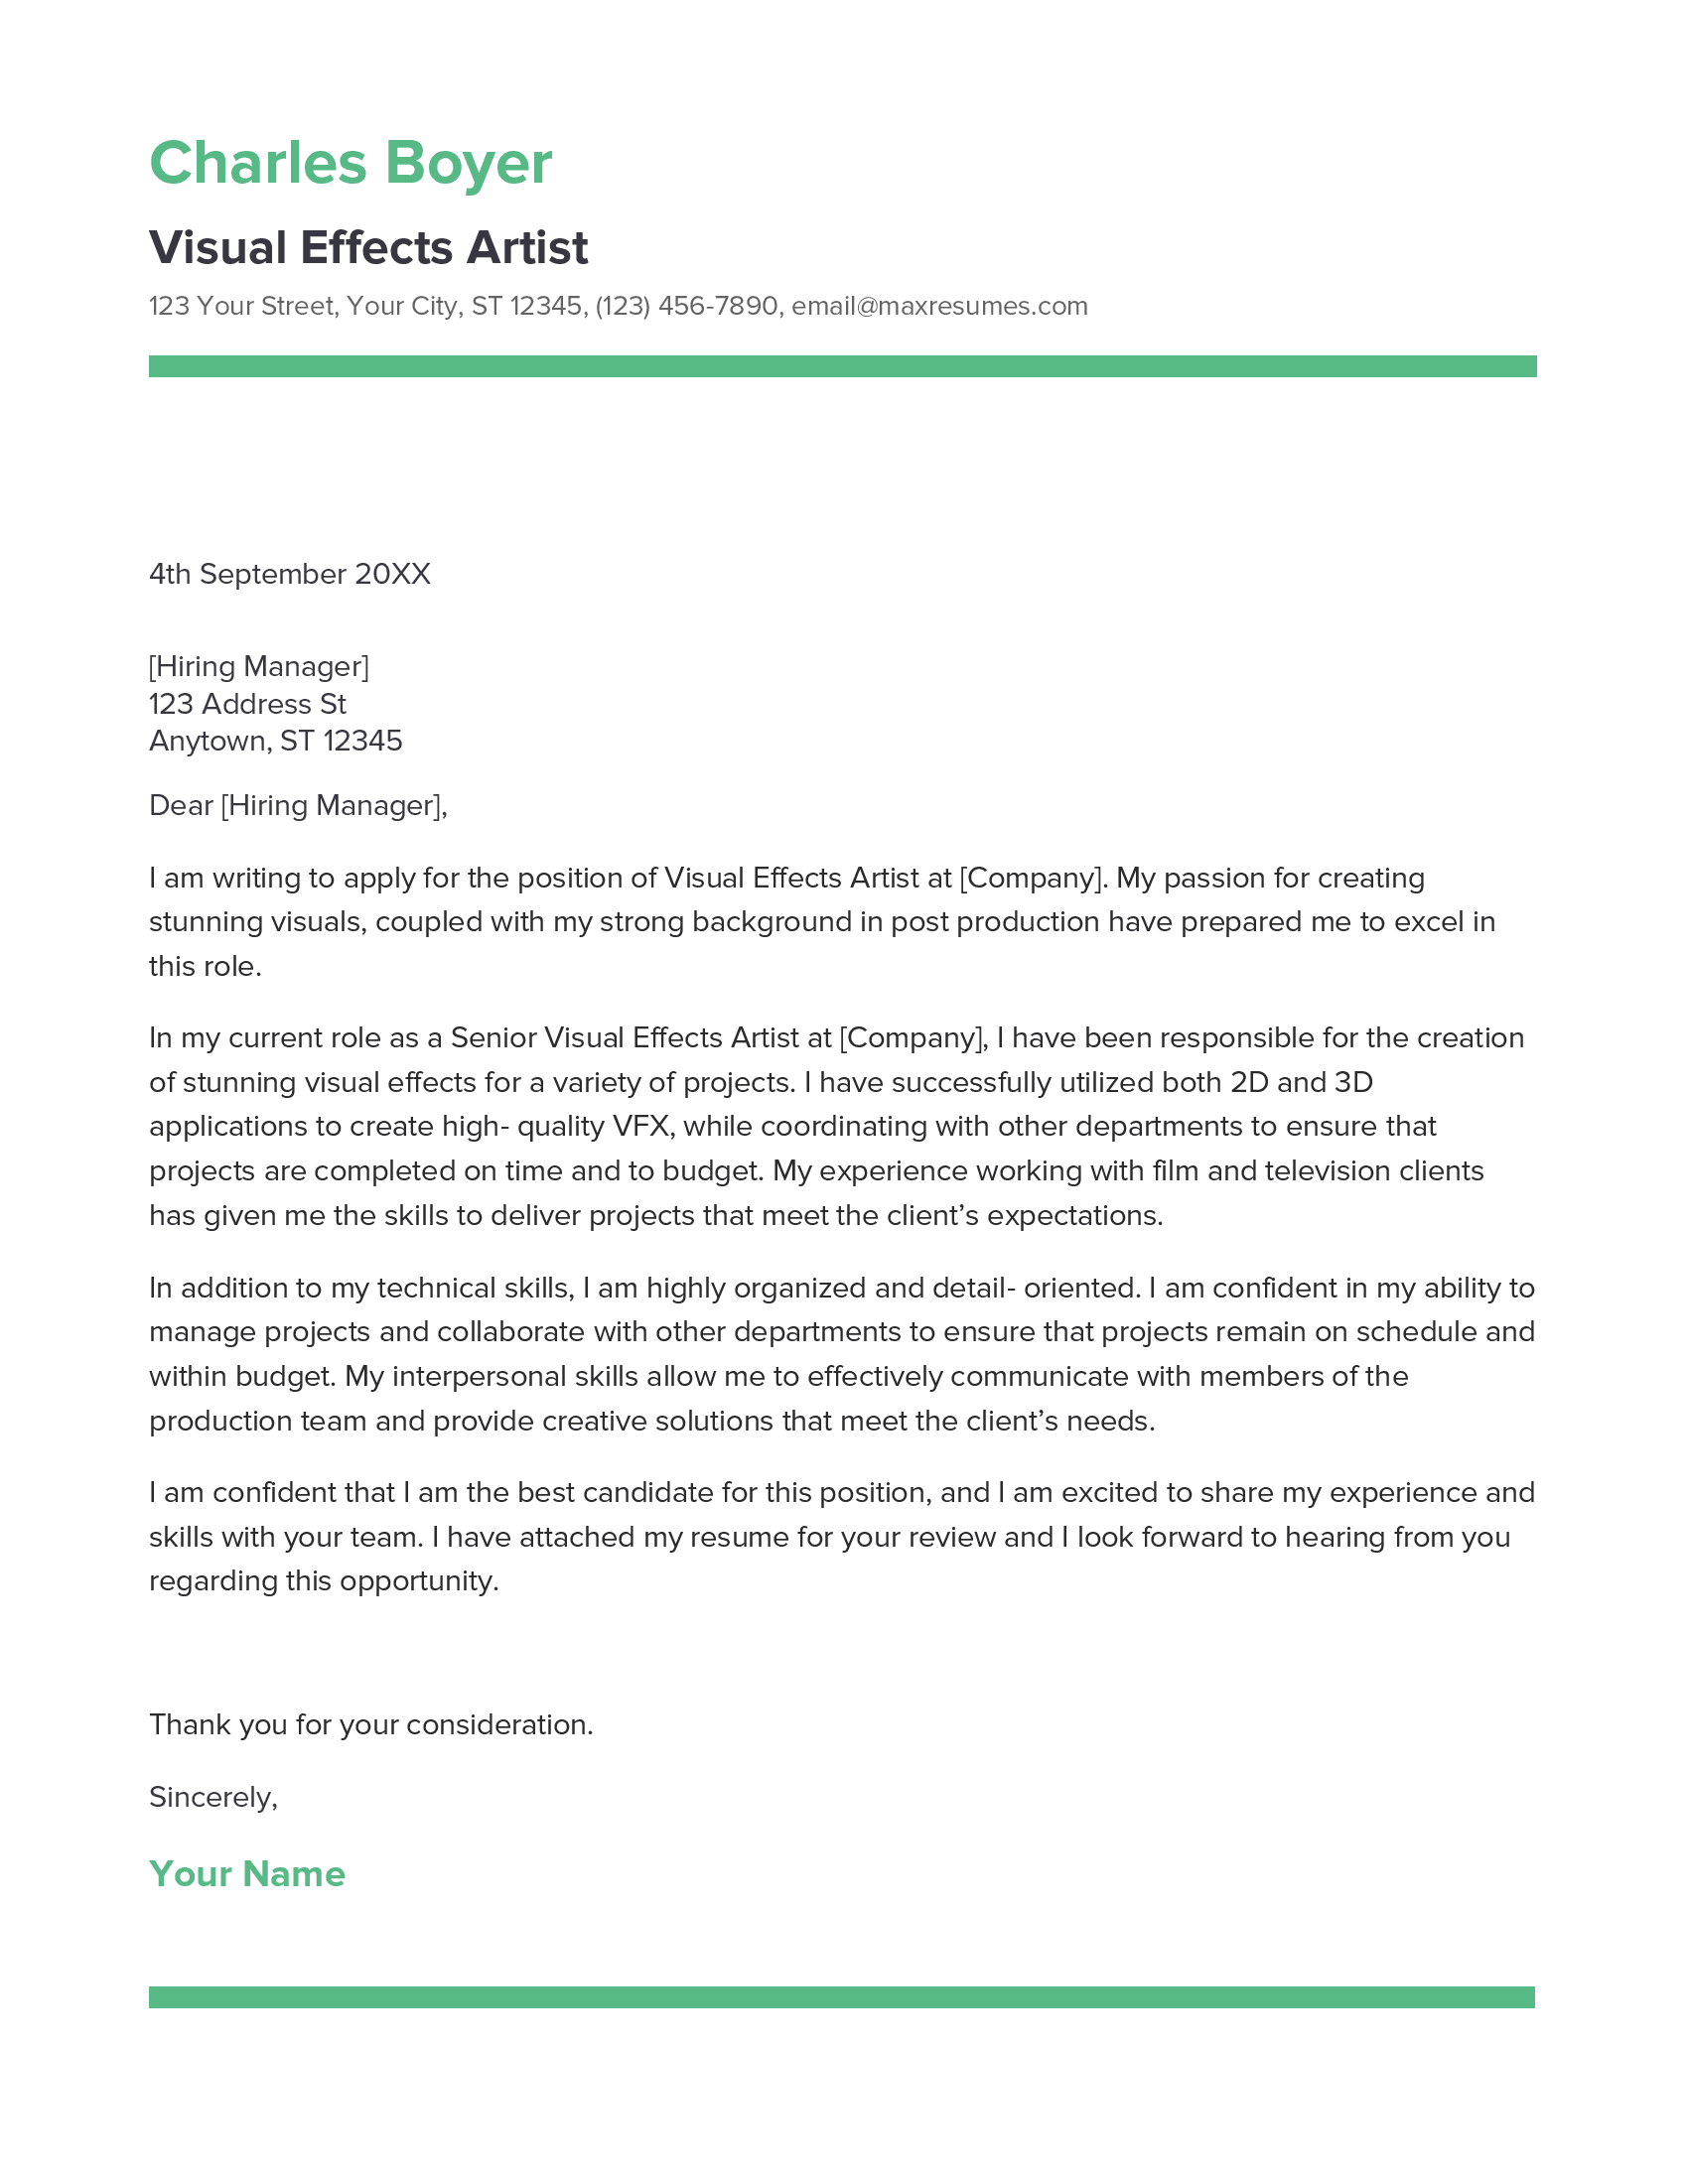 Visual Effects Artist Cover Letter Example